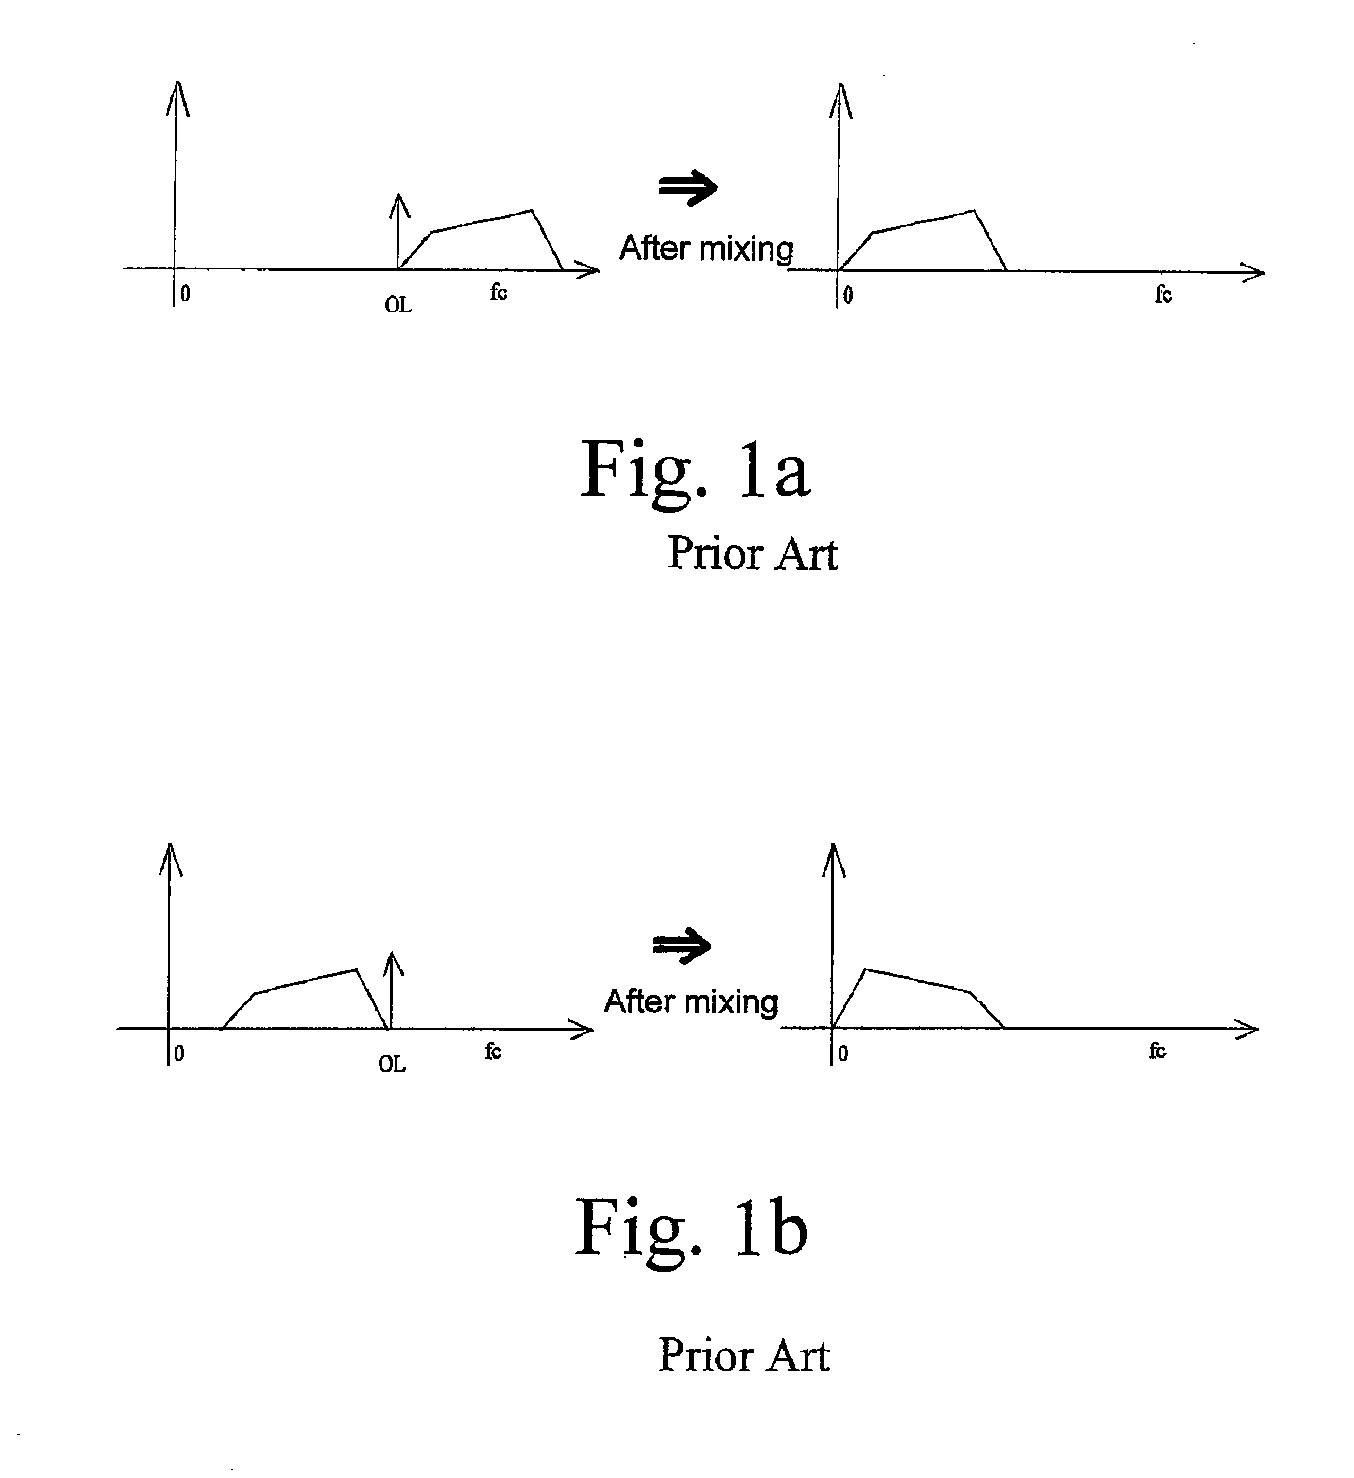 Process for automatic correction of the spectral inversion in a demodulator and device to implement the process